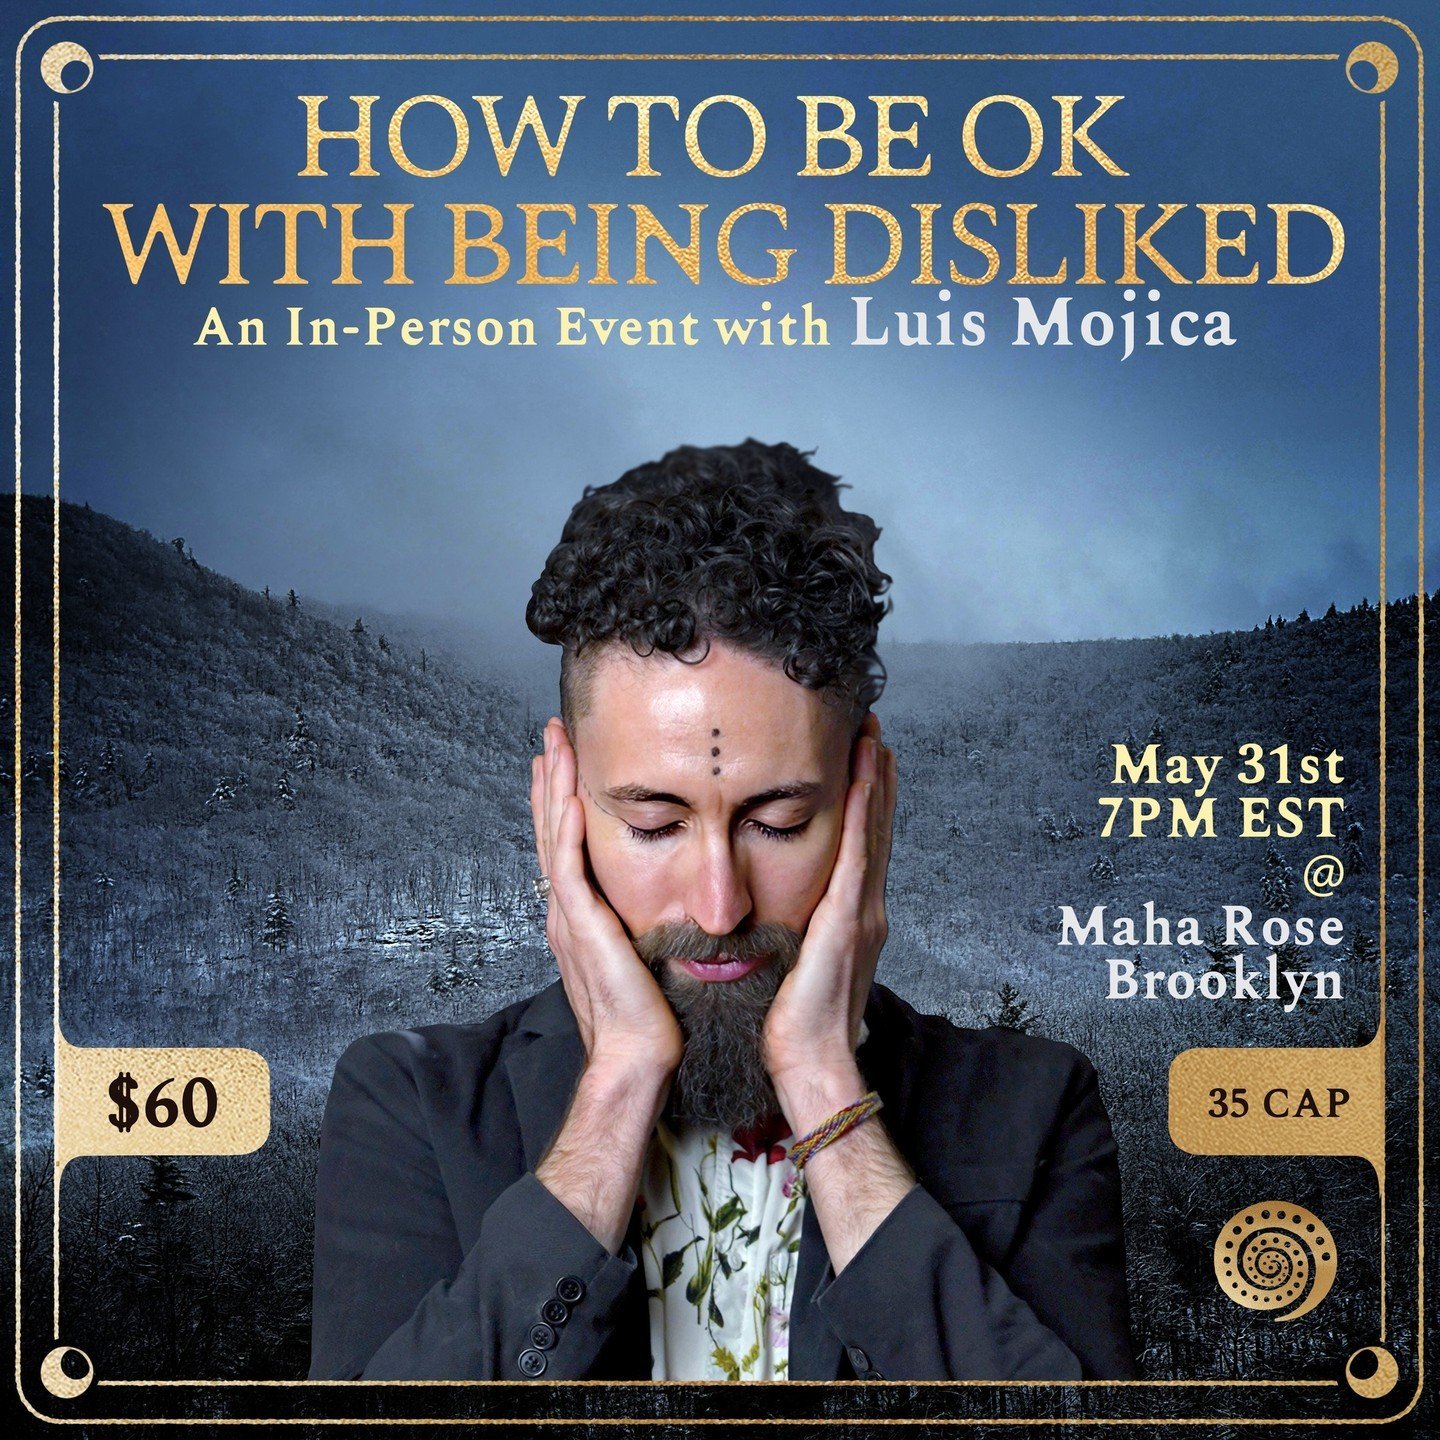 How do you stop fawning and people pleasing? You get really comfortable with being disliked.⁠
⁠
This immersive, in-person workshop will explore our overcouplings and attachment issues that arise when someone doesn't like what we say.⁠
⁠
You know how 